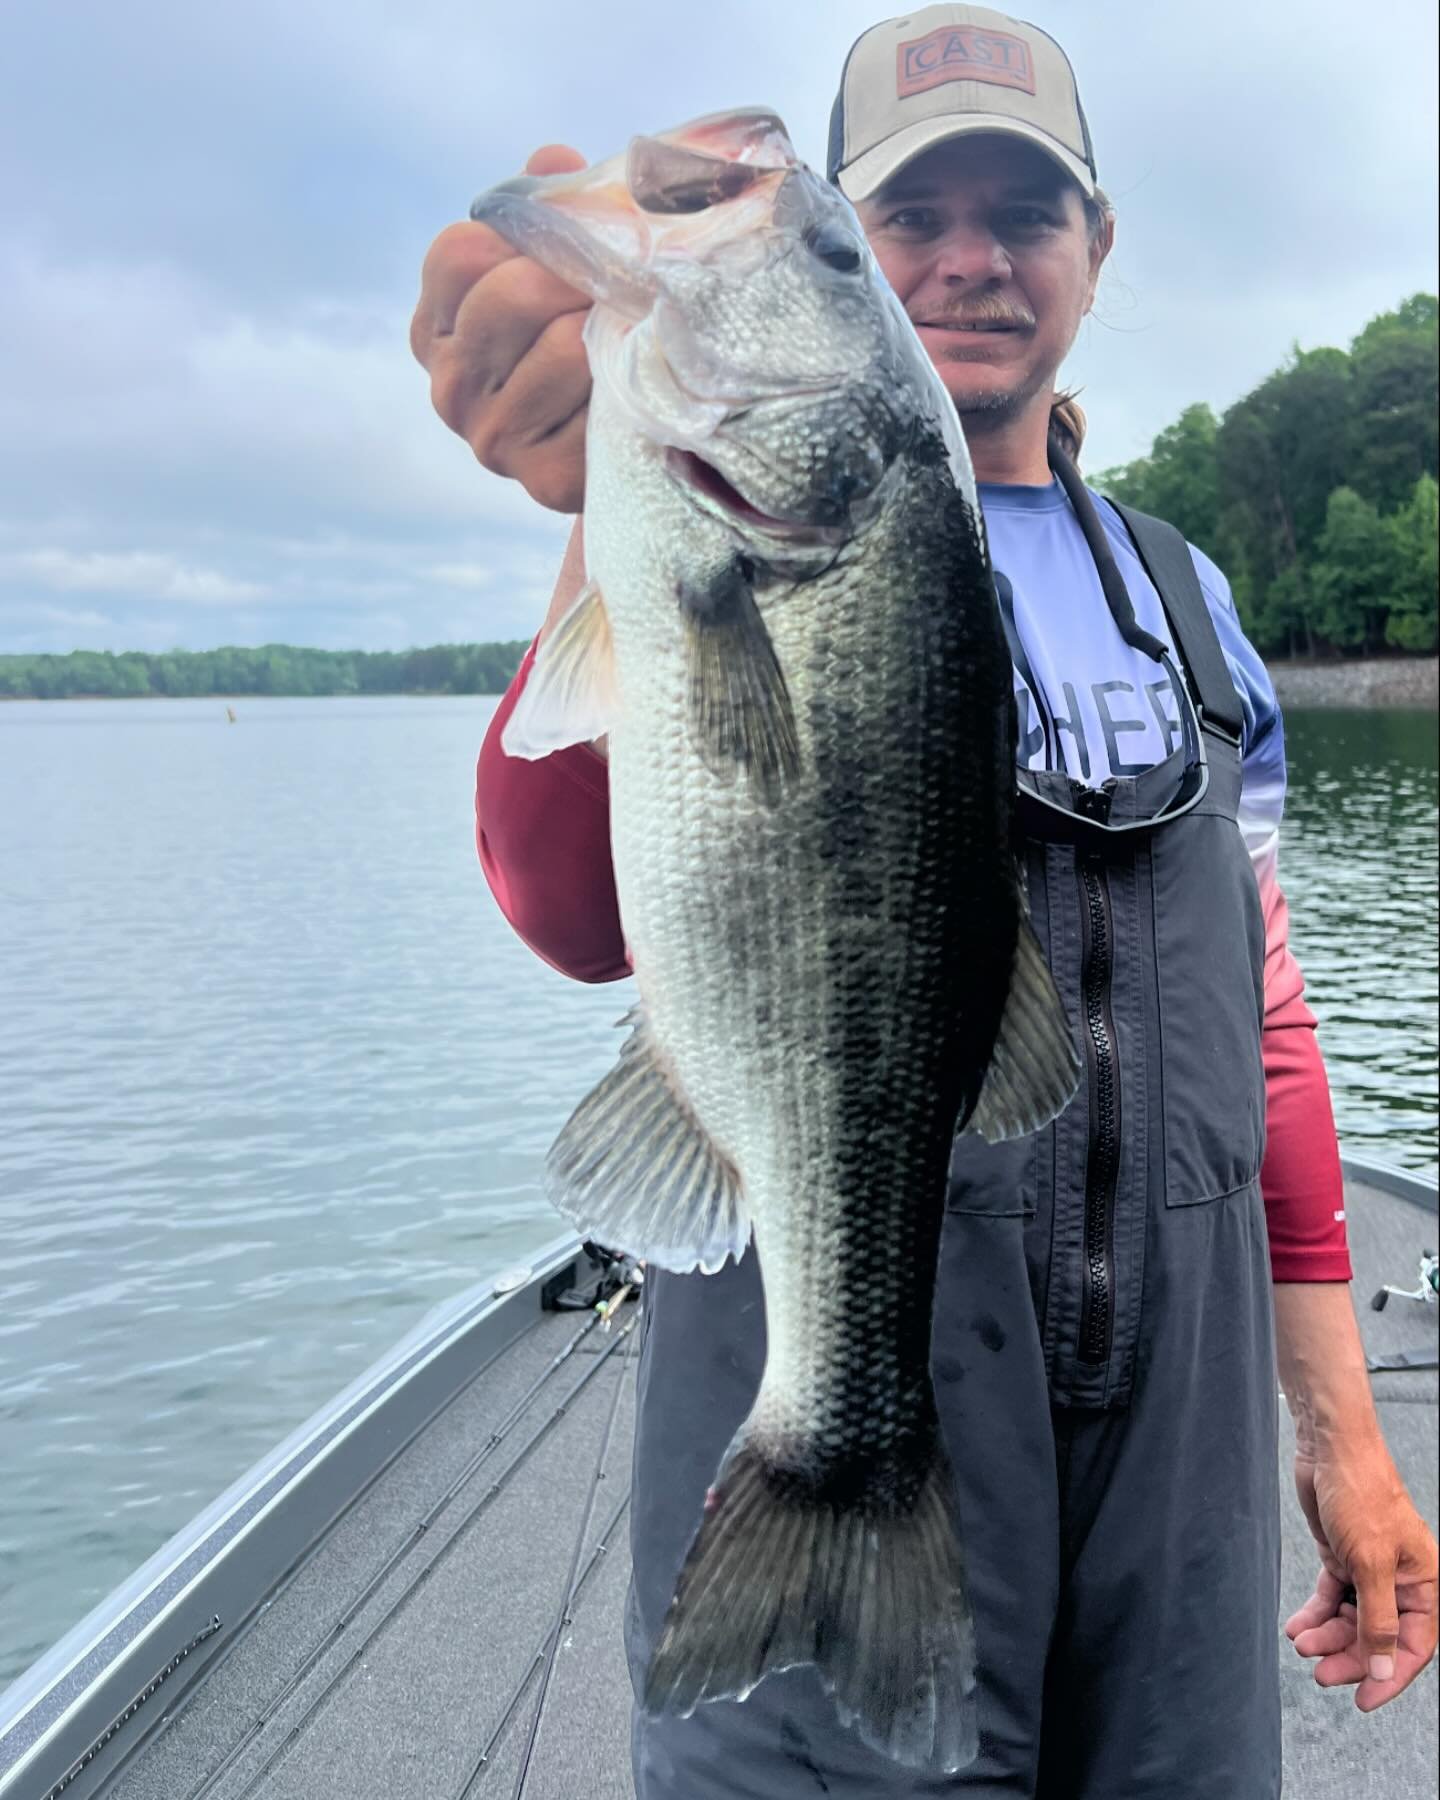 My client snuck away for a 1/2 day fishing trip today.  As a result, I&rsquo;m holding all the fish.  Great numbers, the Lanier Slam several times over, and caught some great LM to boot! 

The roll up of today&rsquo;s festivities can be found here:  